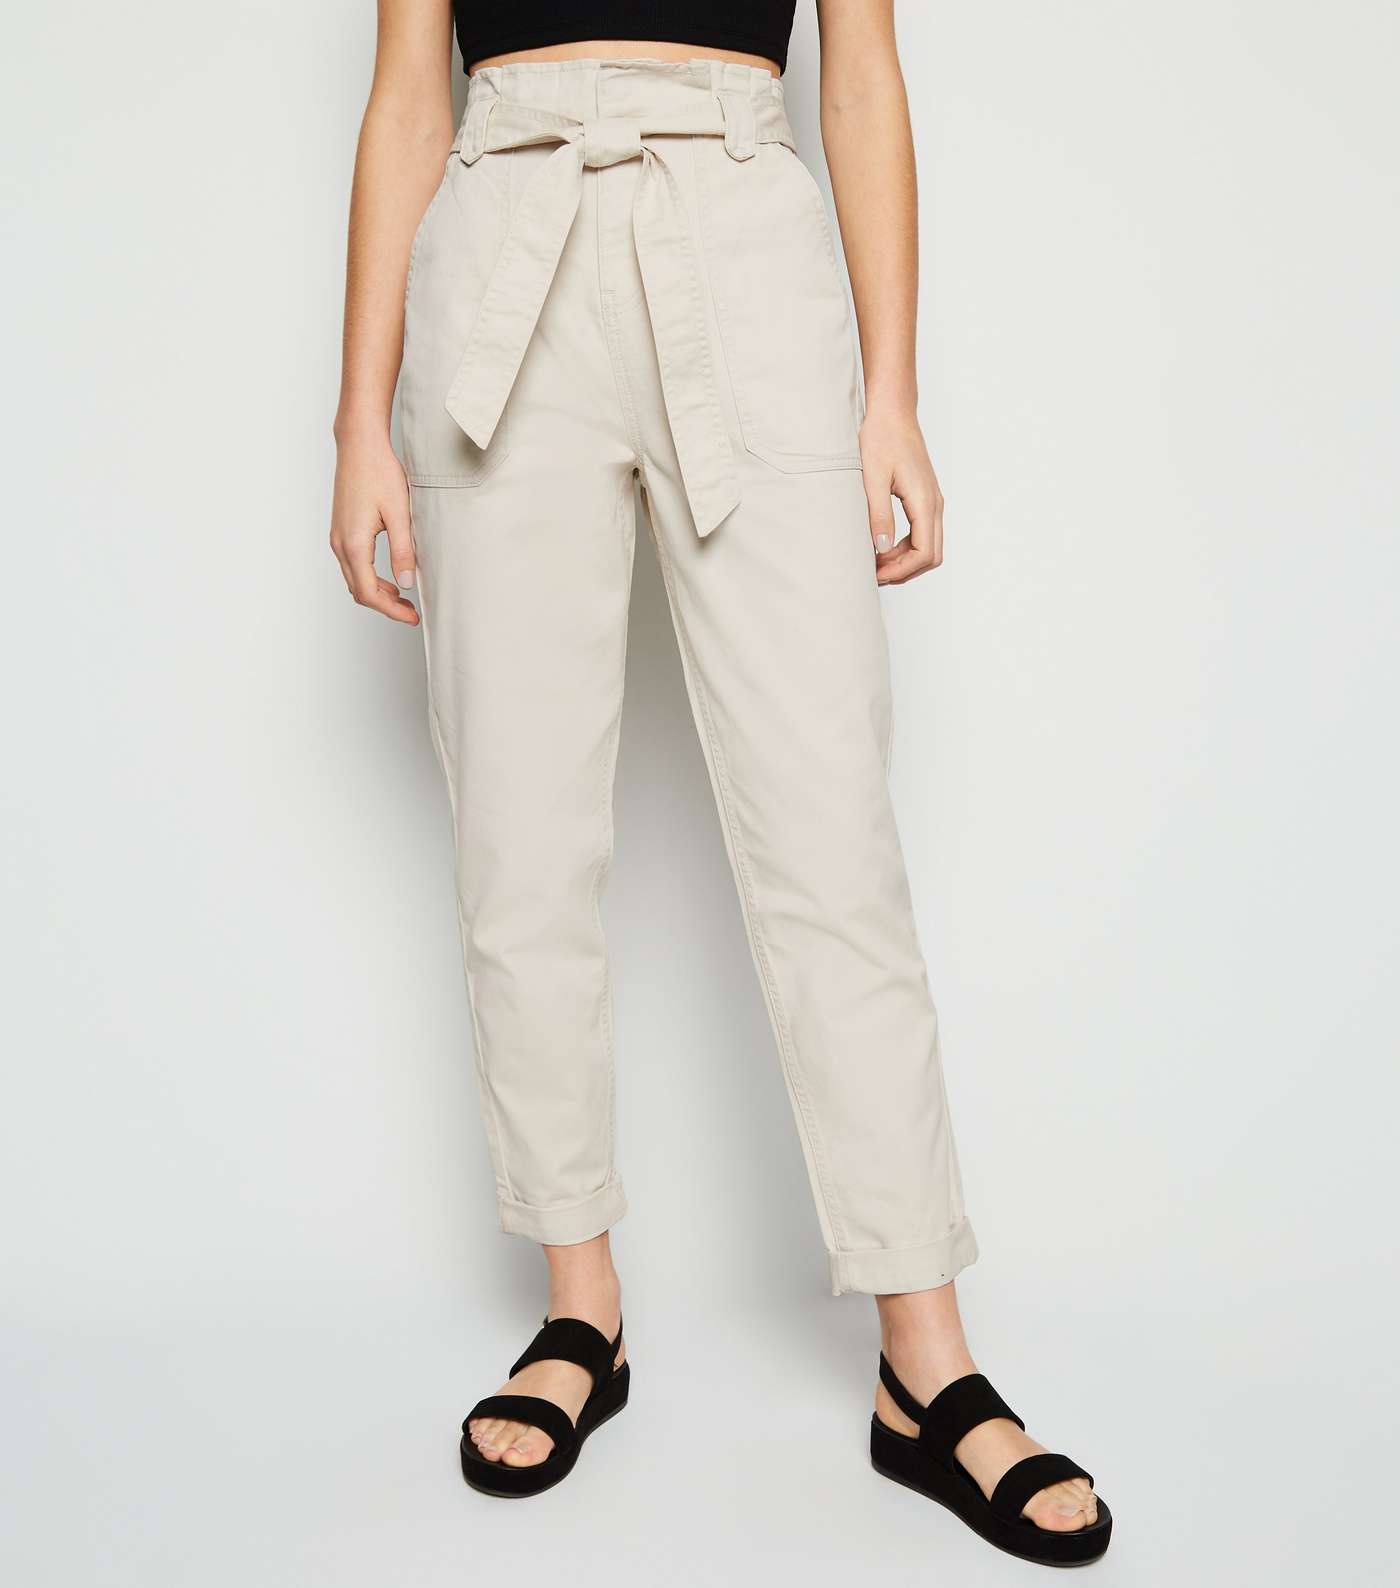 Off White High Waist Tapered Denim Trousers Image 2